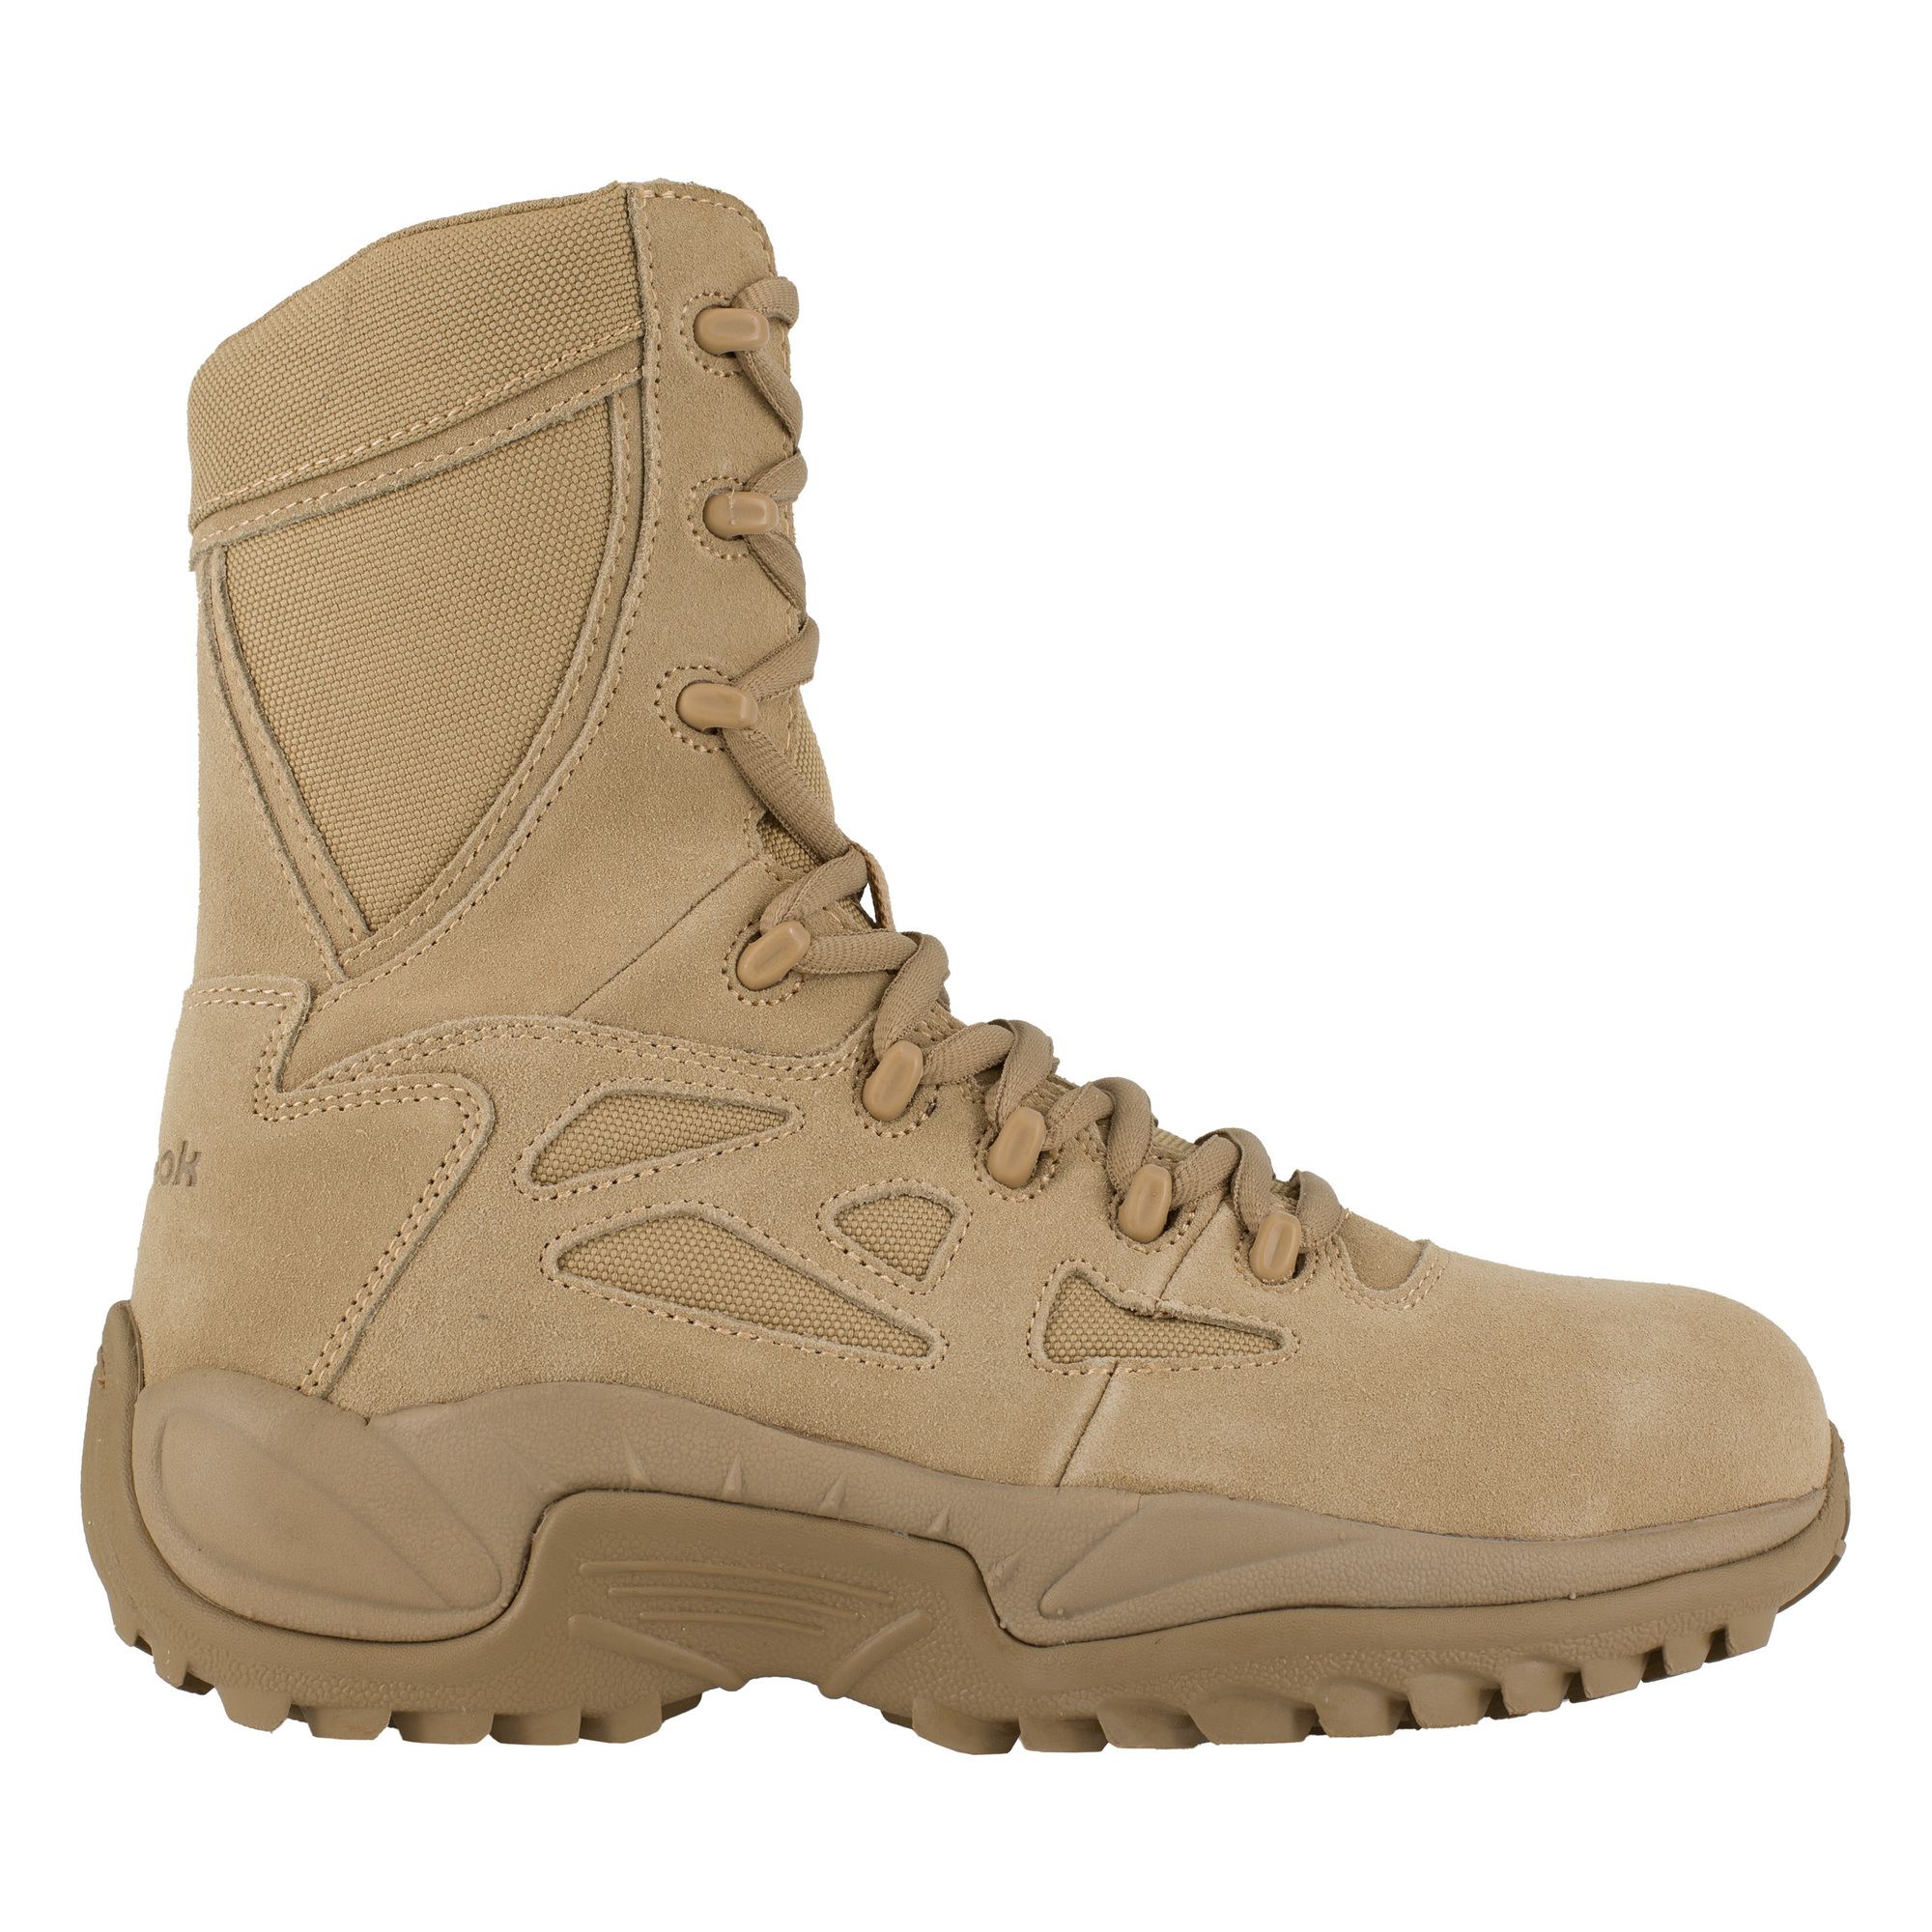 Reebok, 8Inch Stealth Tactical Boot with Side Zipper, Size 6, Width Wide, Color Desert Tan, Model RB894